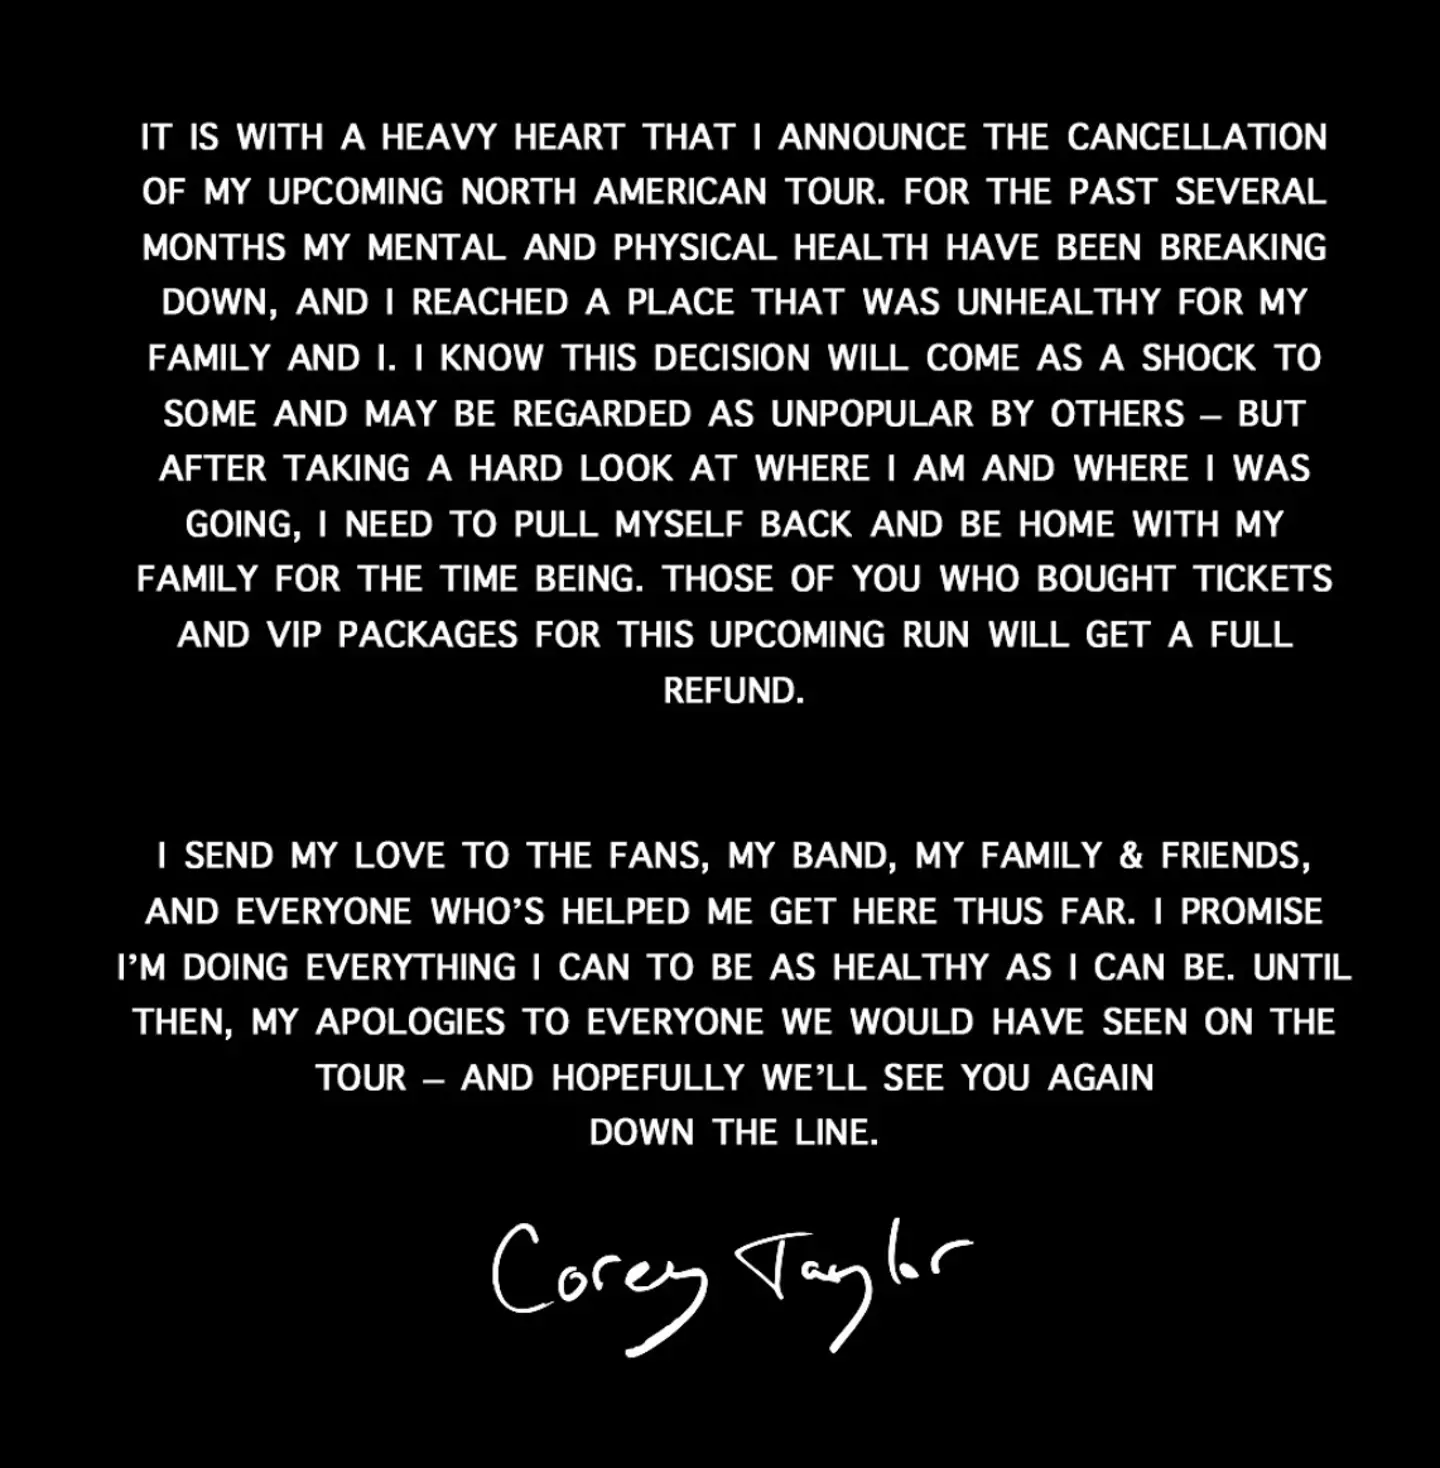 A statement regarding the star's mental health and North American tour cancellation was shared earlier this month.